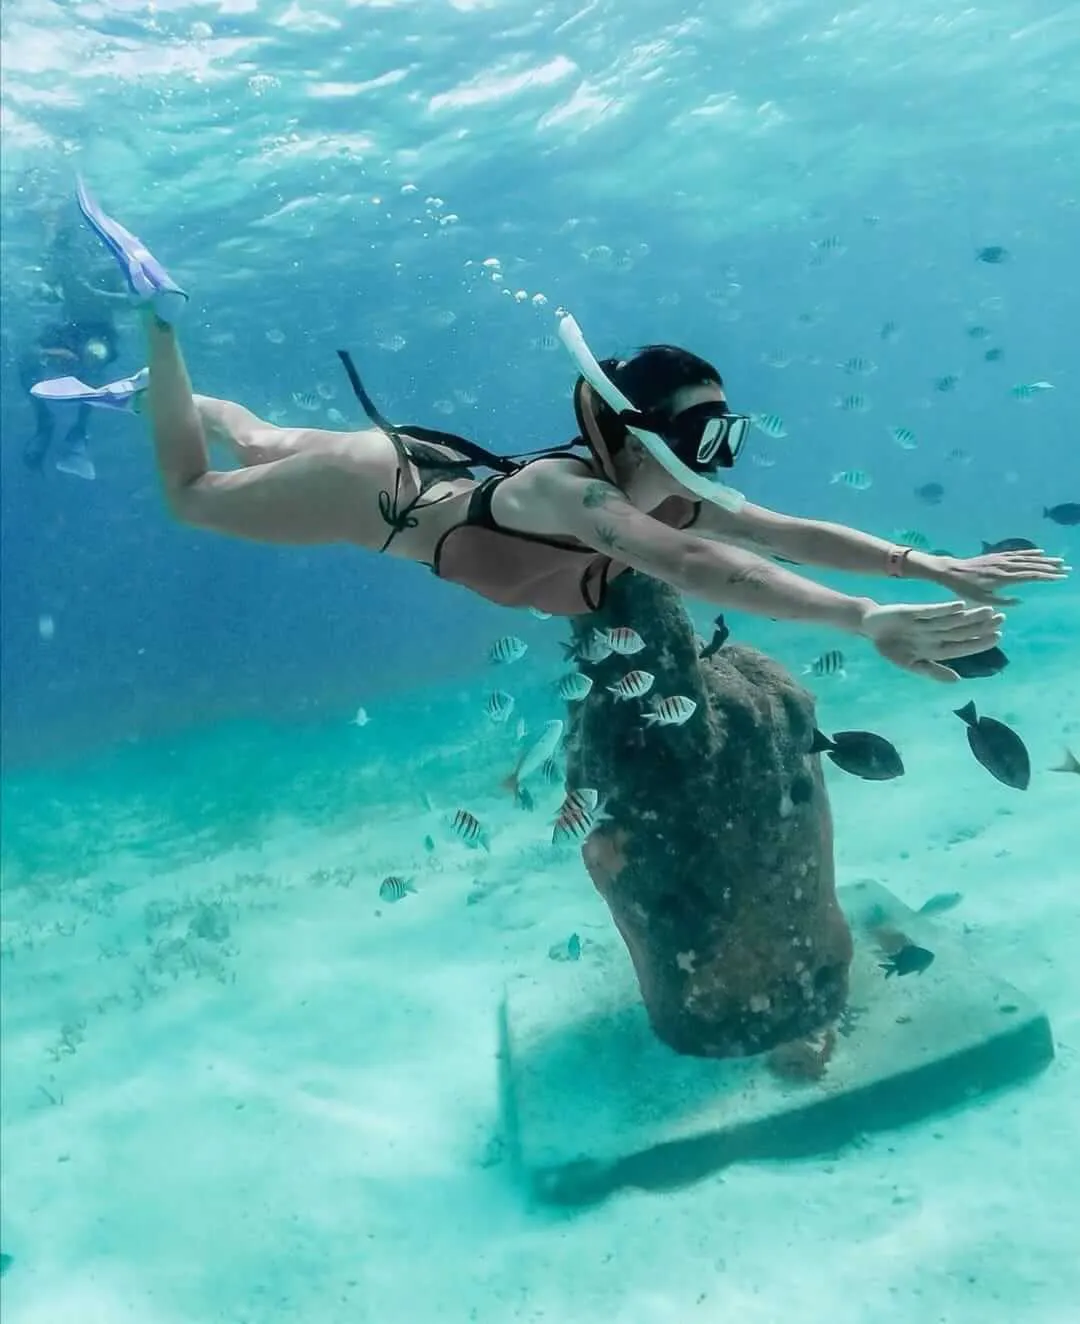 Tattooed snorkeler girl swimming among fish in front of underwater statue